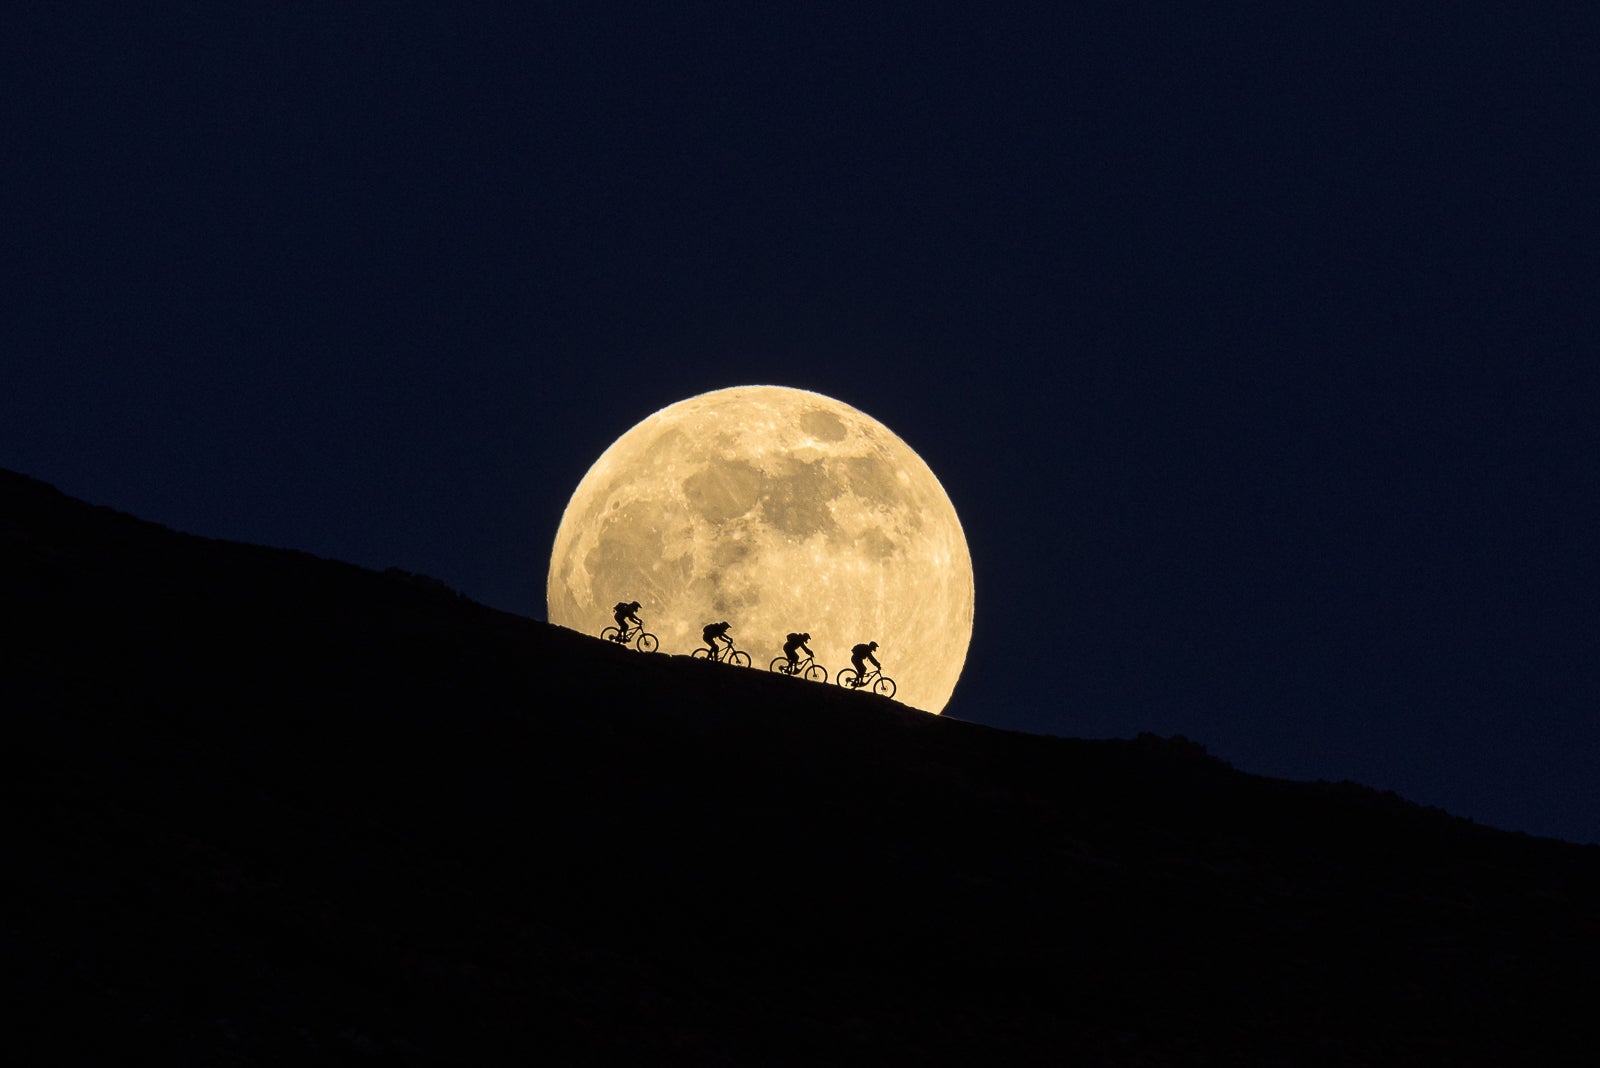 four cyclists silhouettes against the moon